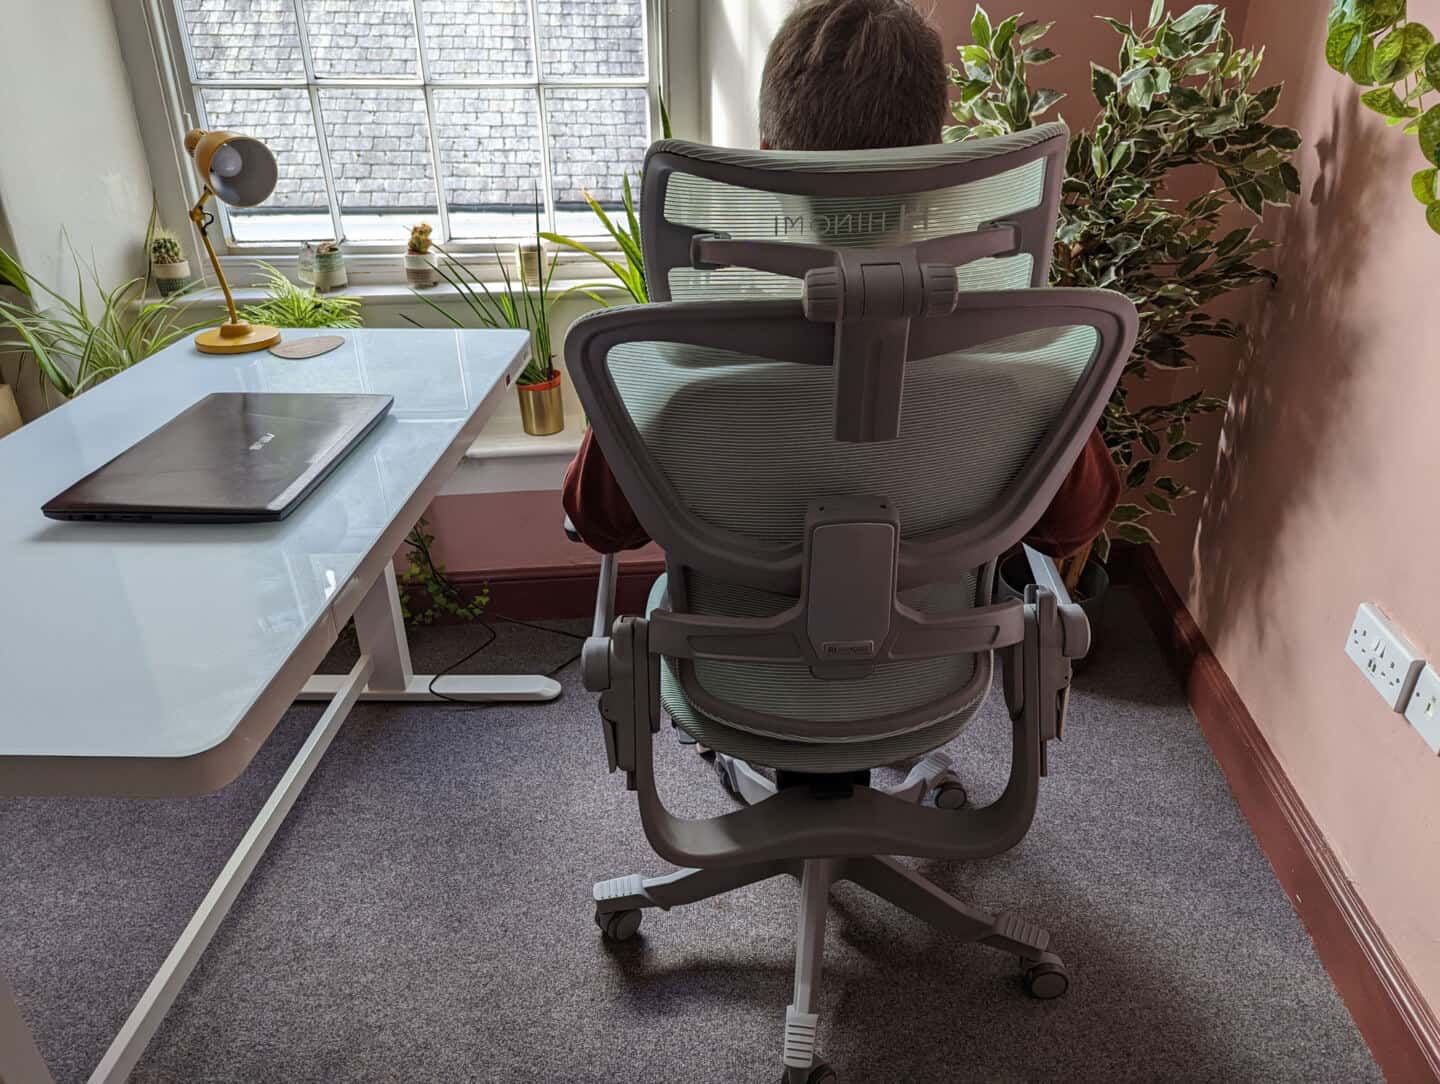 A rear view of a woman sat in an office chair in a pink office surrounded by plants